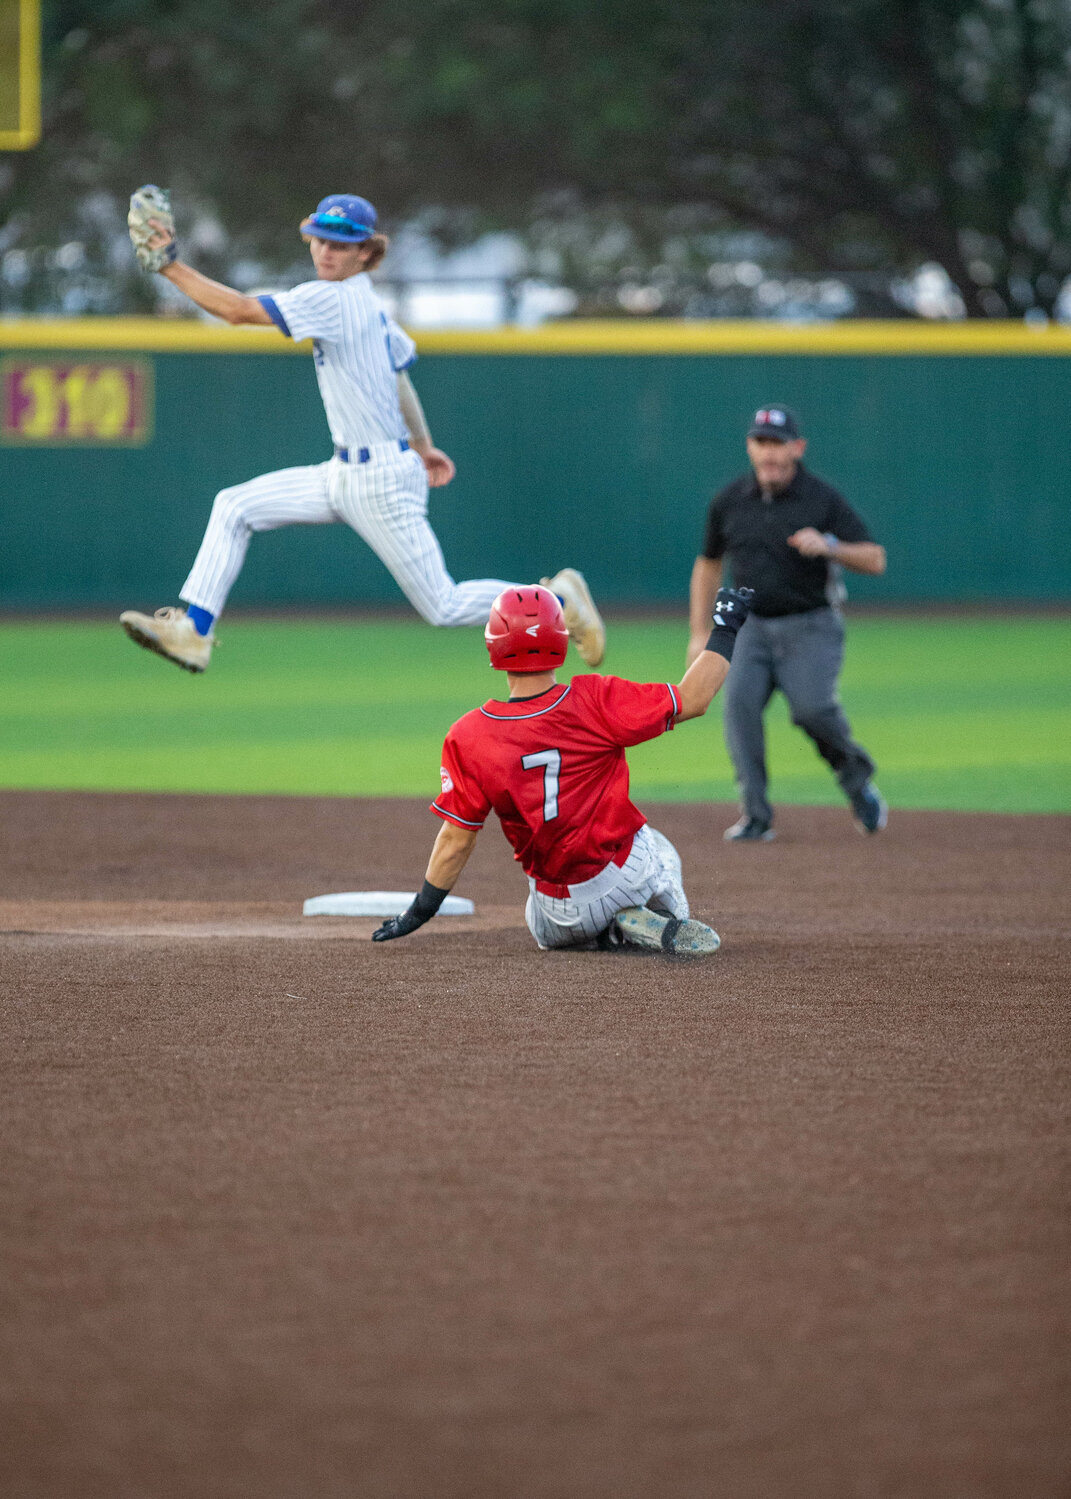 Brady Englett slides into second base during Wednesday's Regional Semifinal between Katy and Clear Springs at Deer Park.